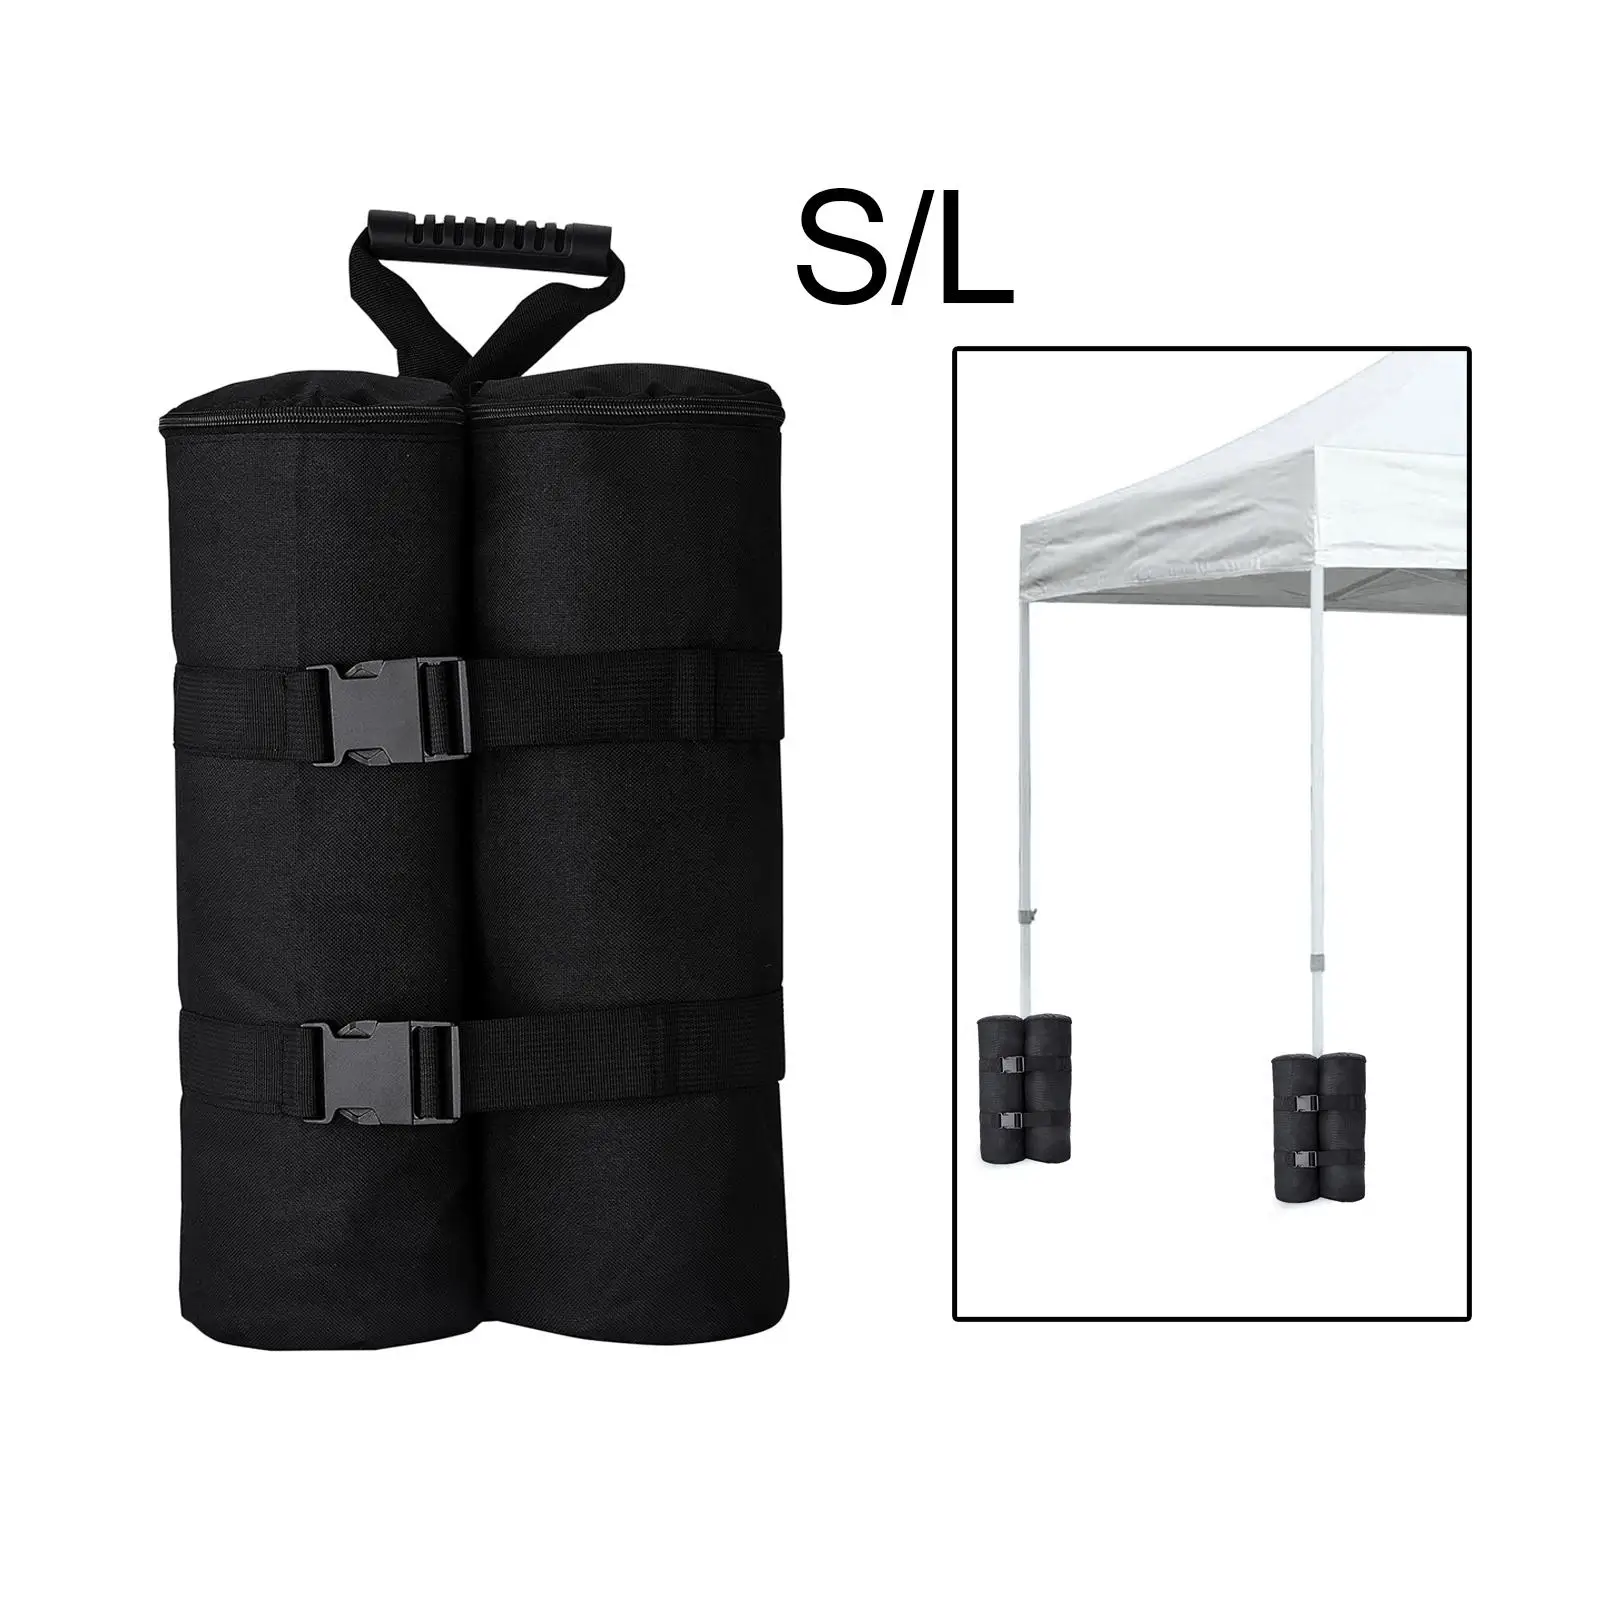 Large Weight Bags for Canopy, Canopy Weight Sandbag Fixed Leg Weights Sand Bag for Outdoor Patio Umbrella Base, No Sands